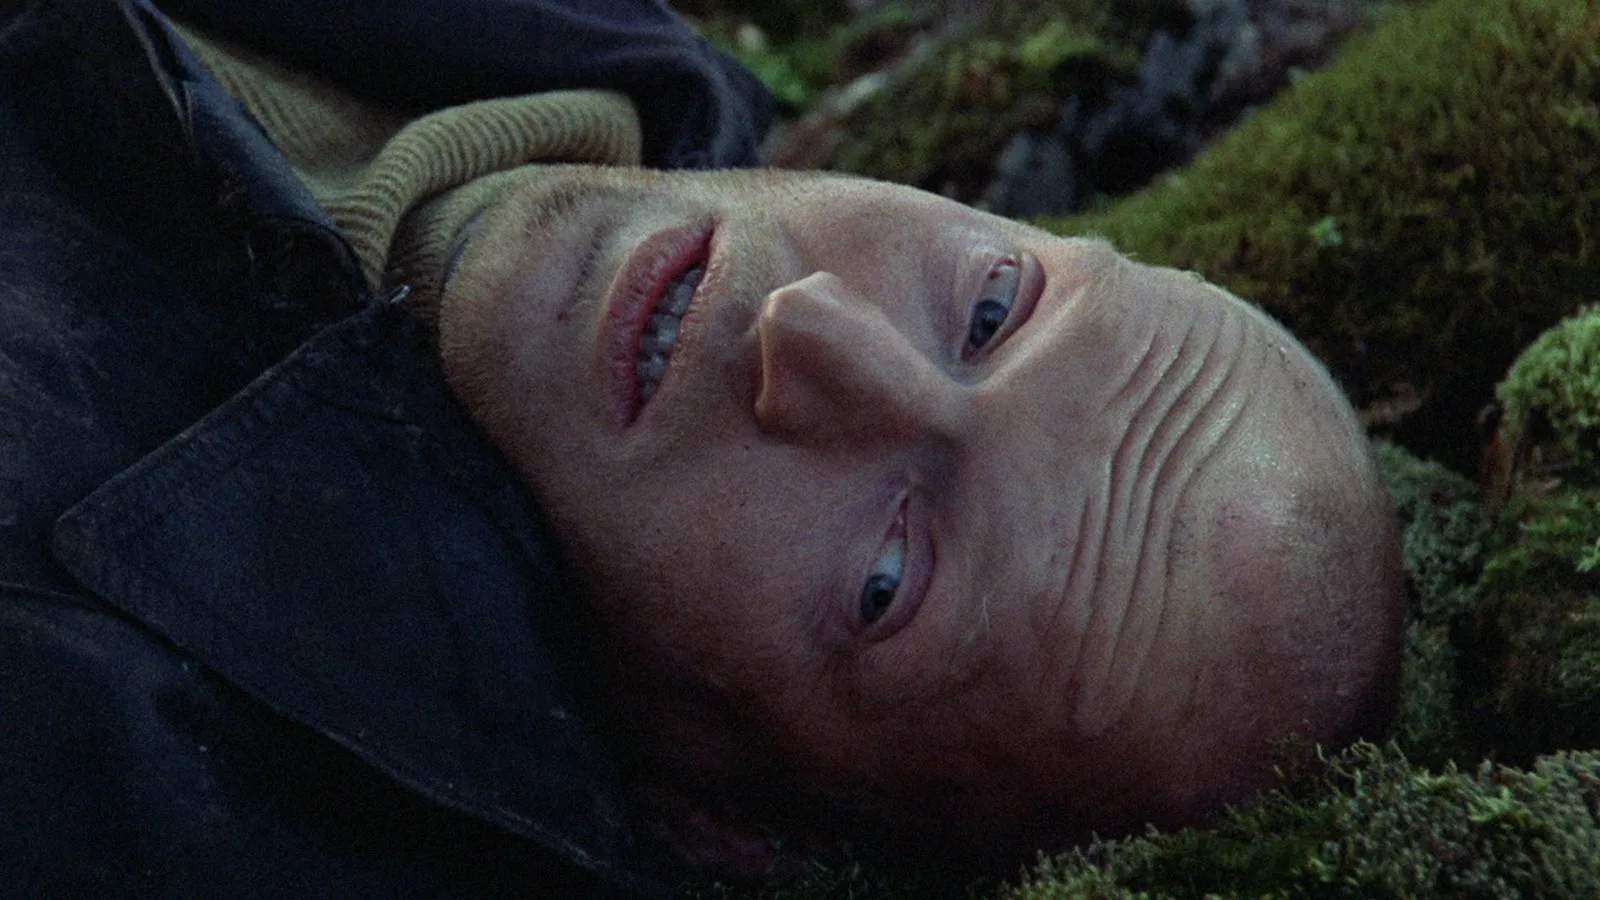 A man laying on the ground with little hair, wearing a blue jacket & green shirt stares blankly ahead.